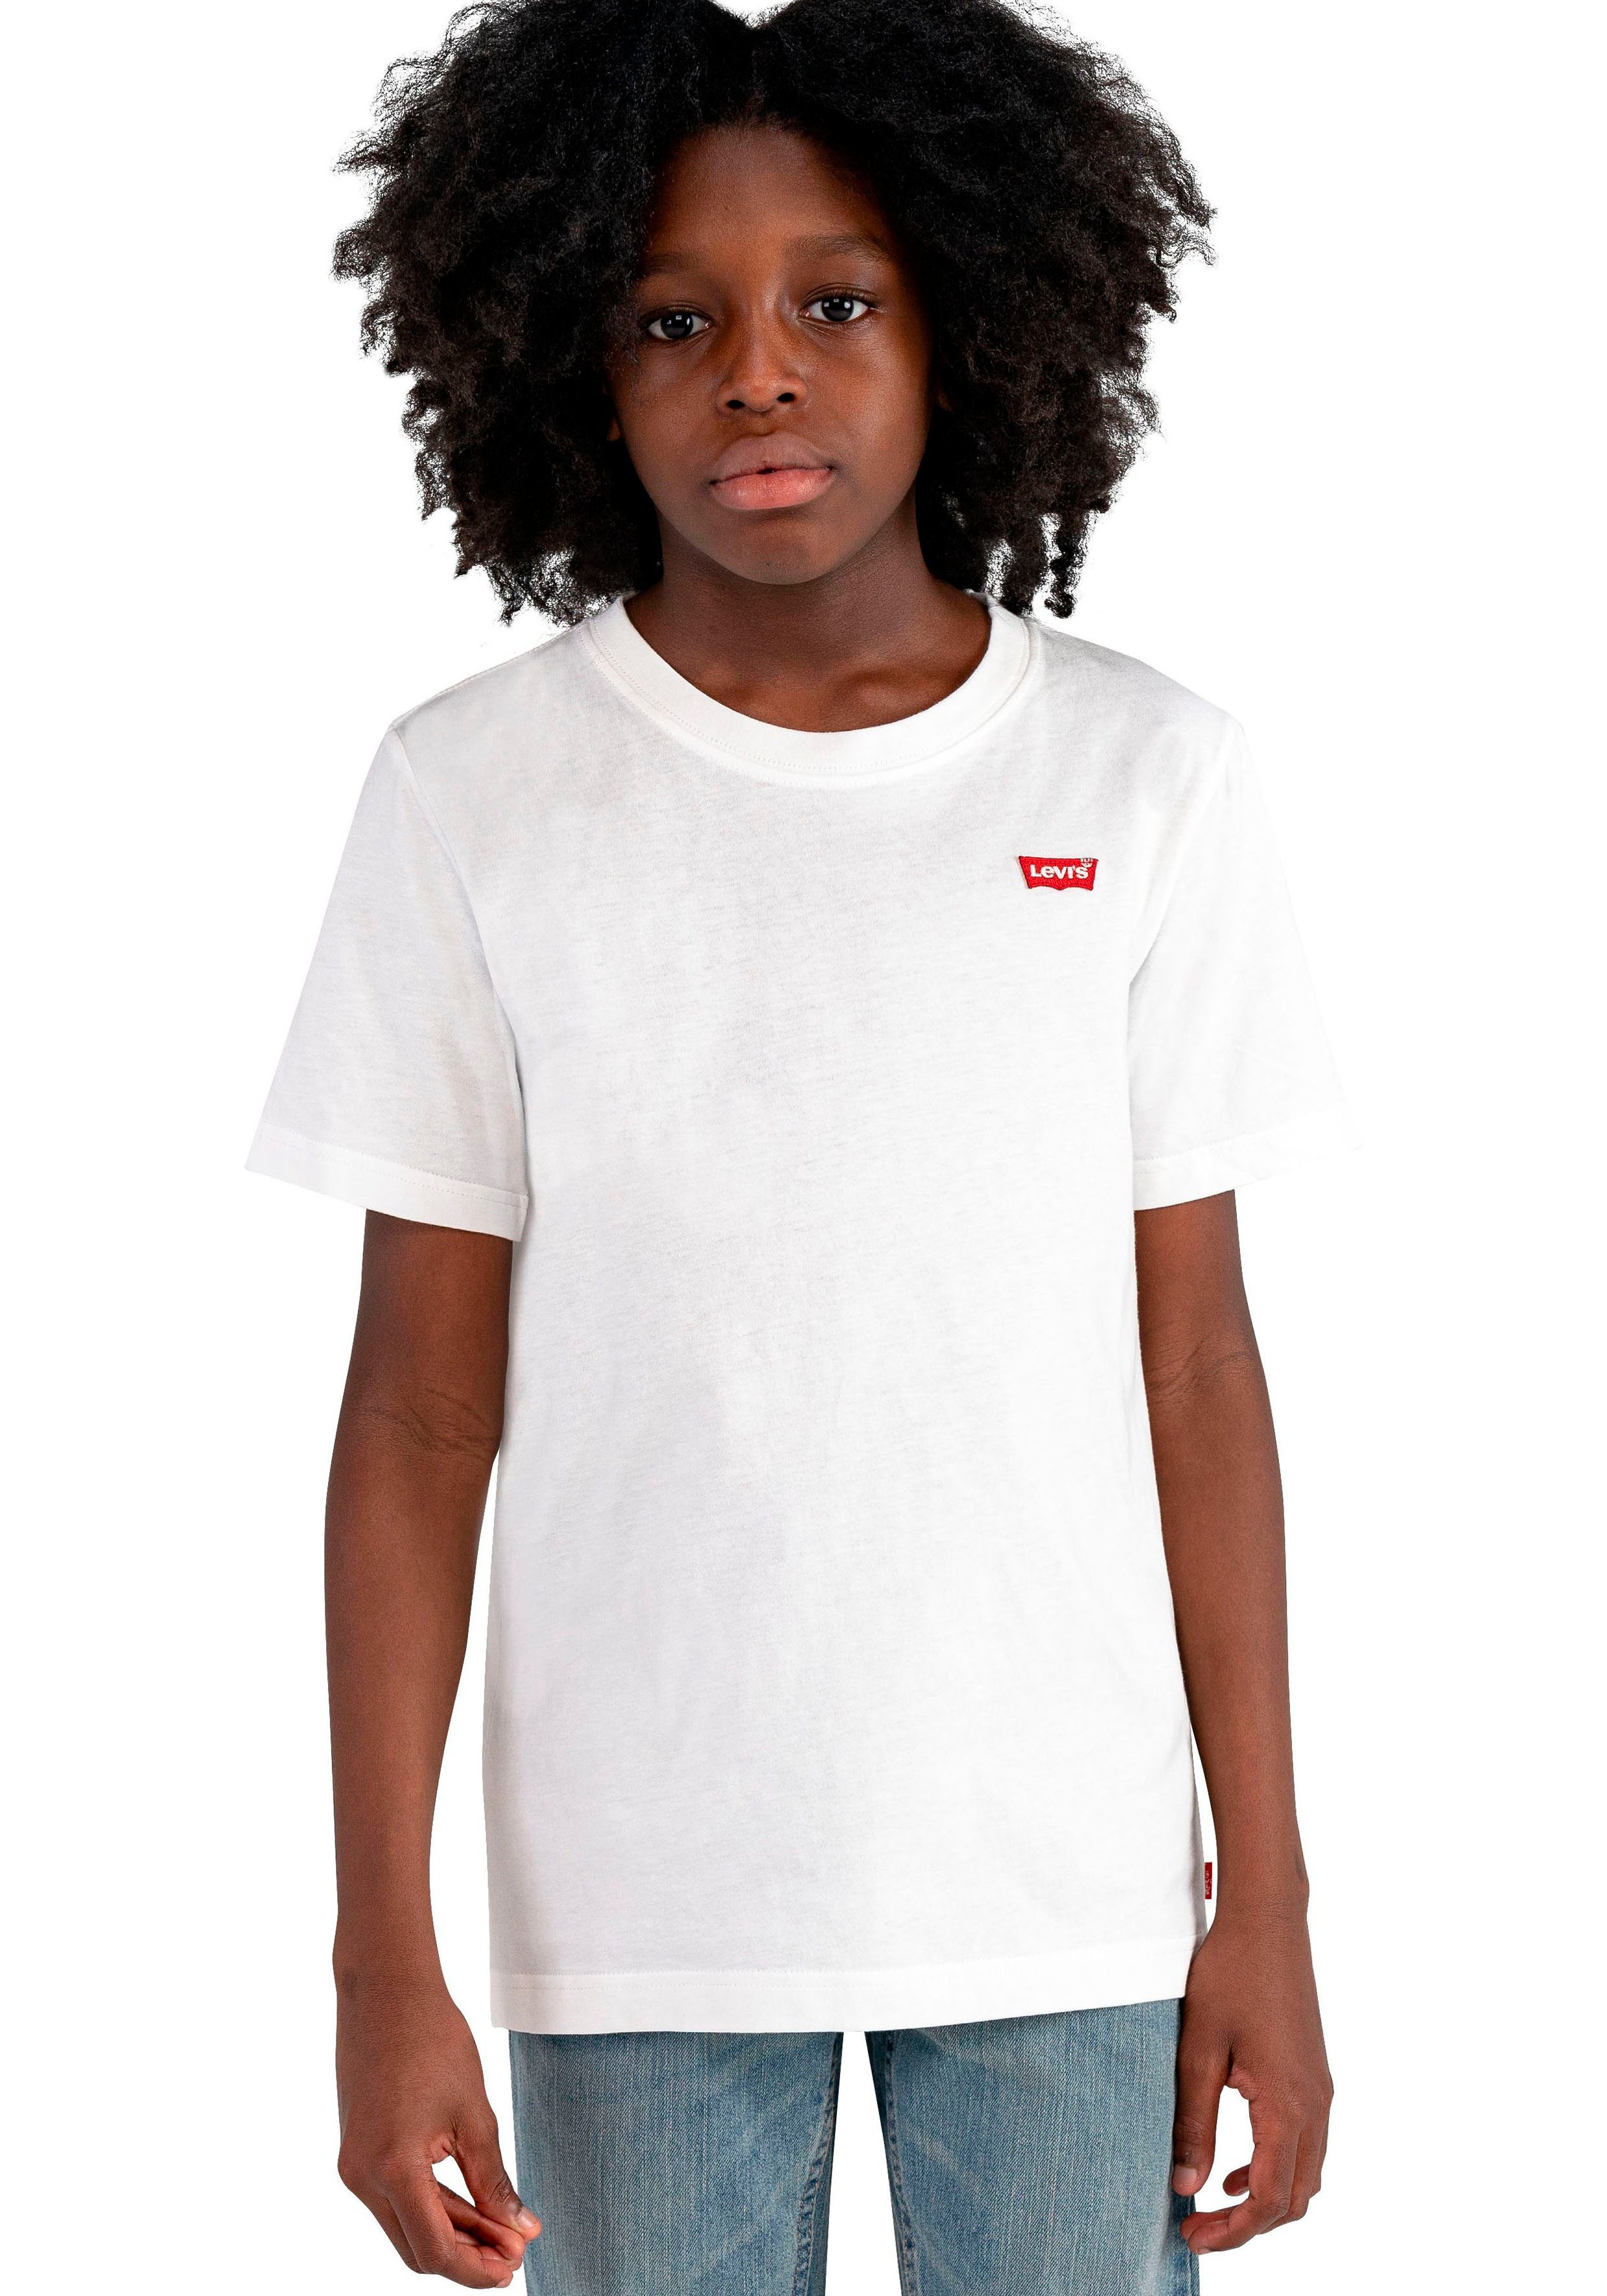 Levi's® Kids T-Shirt white for HIT BATWING BOYS CHEST